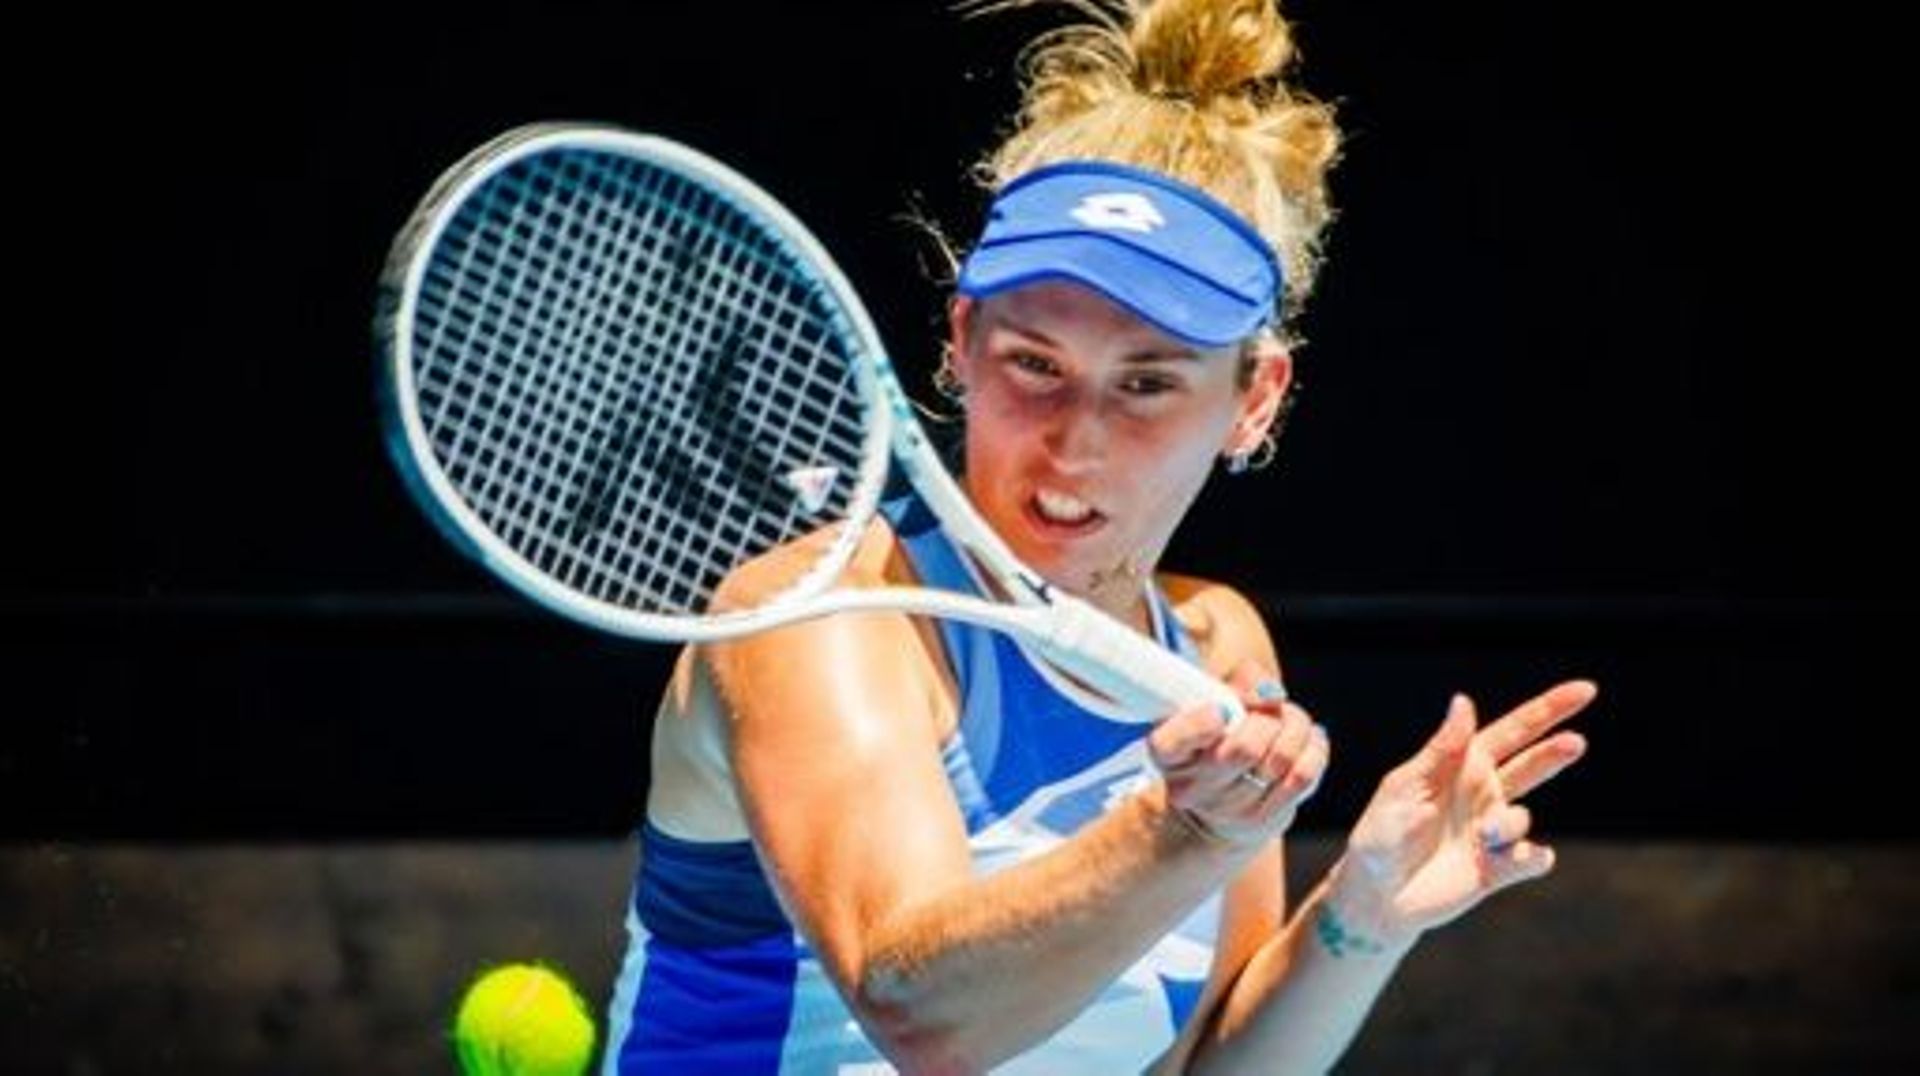 Elise Mertens (WTA 32) pictured in action during a women’s singles first round game between Belgian Mertens (WTA 27) and Spanish Muguruza (WTA 58) at the 'Australian Open' tennis Grand Slam, Tuesday 17 January 2023 in Melbourne Park, Melbourne, Australia.